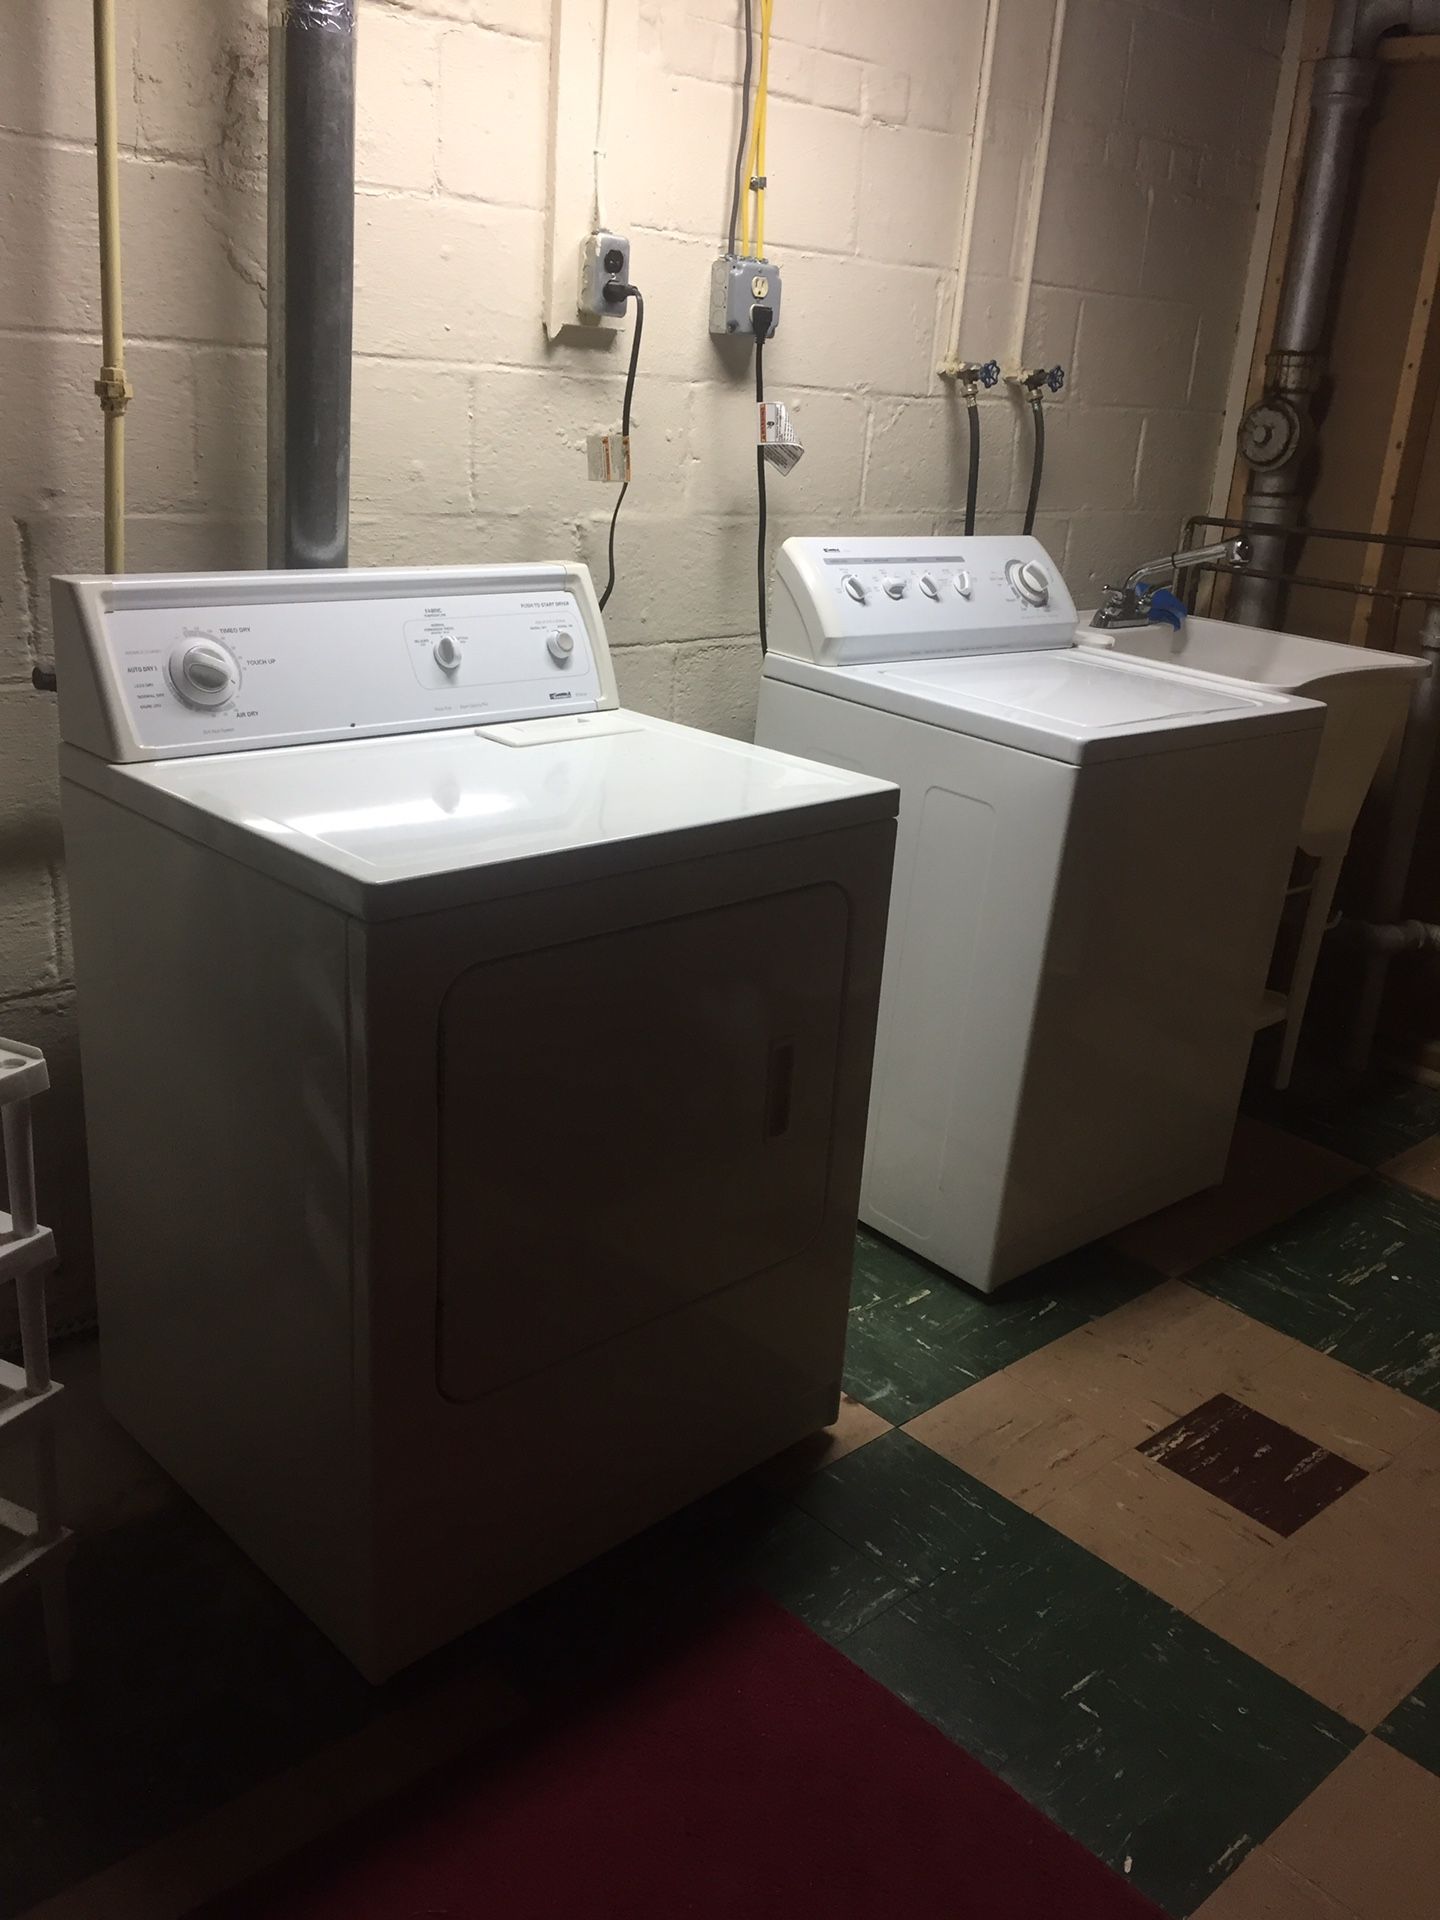 Gas washer and dryer in good condition